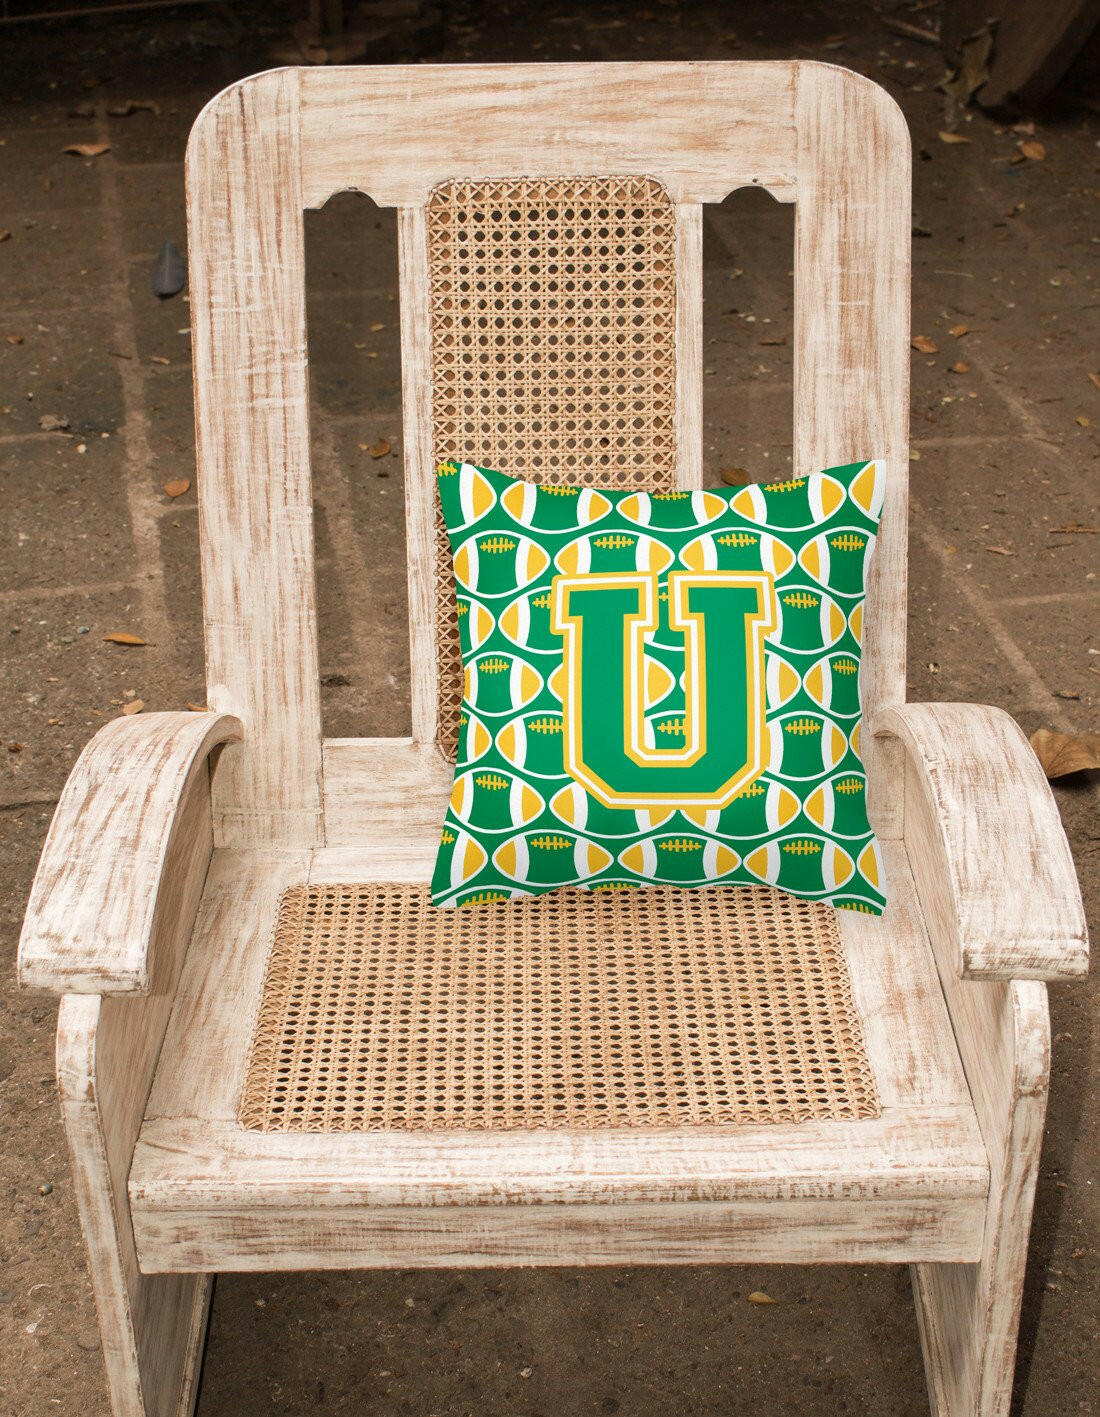 Letter U Football Green and Gold Fabric Decorative Pillow CJ1069-UPW1414 by Caroline's Treasures